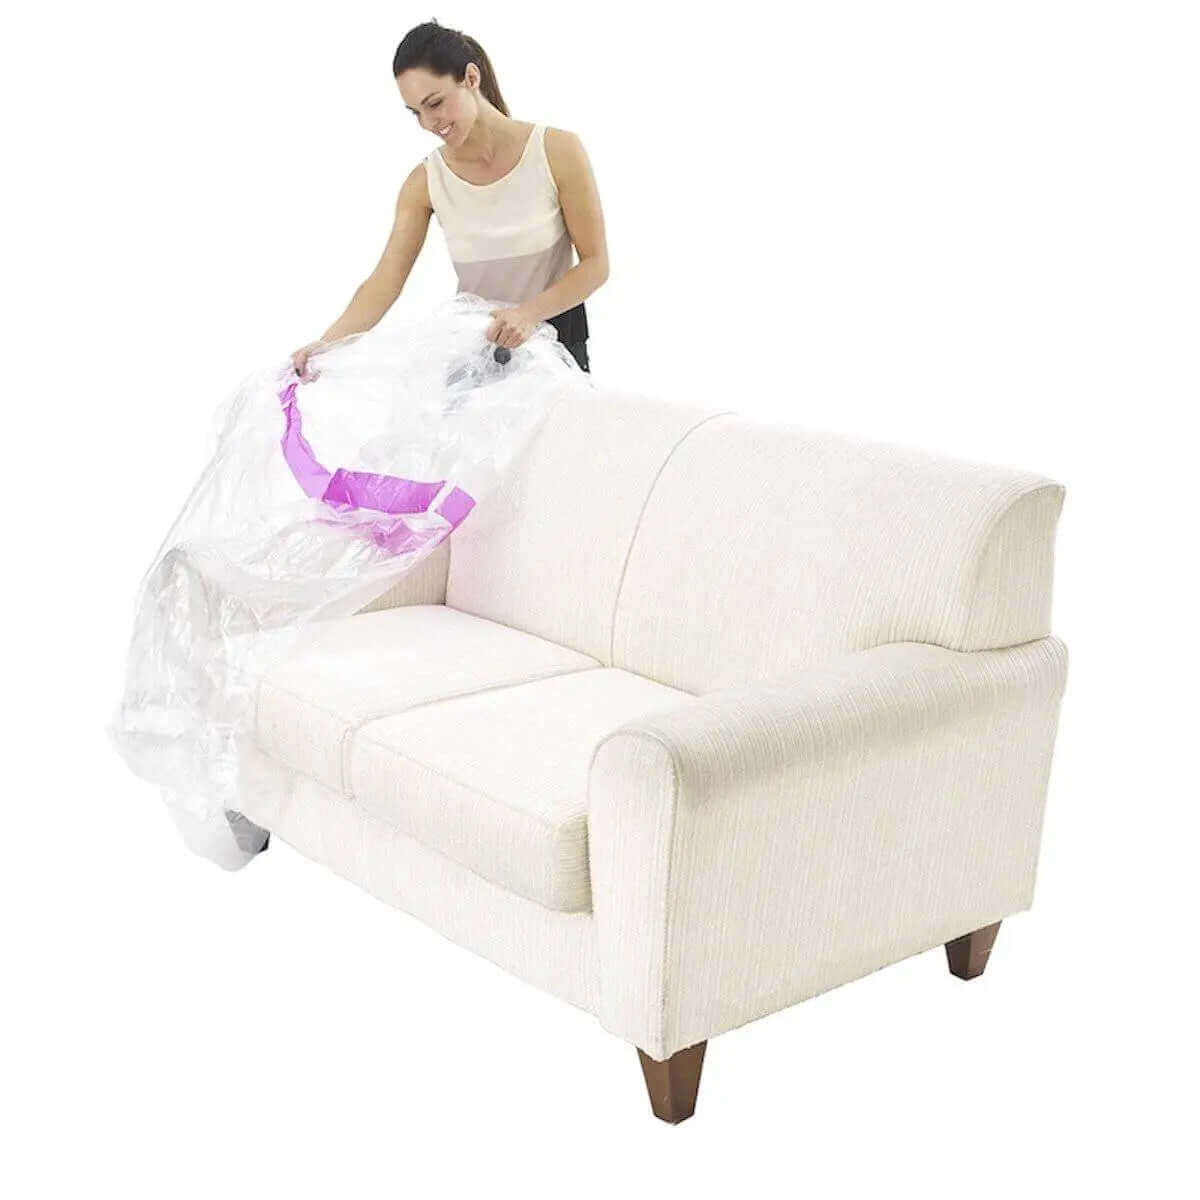 Furniture Protection Covers for Moving and Storage | Storage Bags and Covers | Packstore